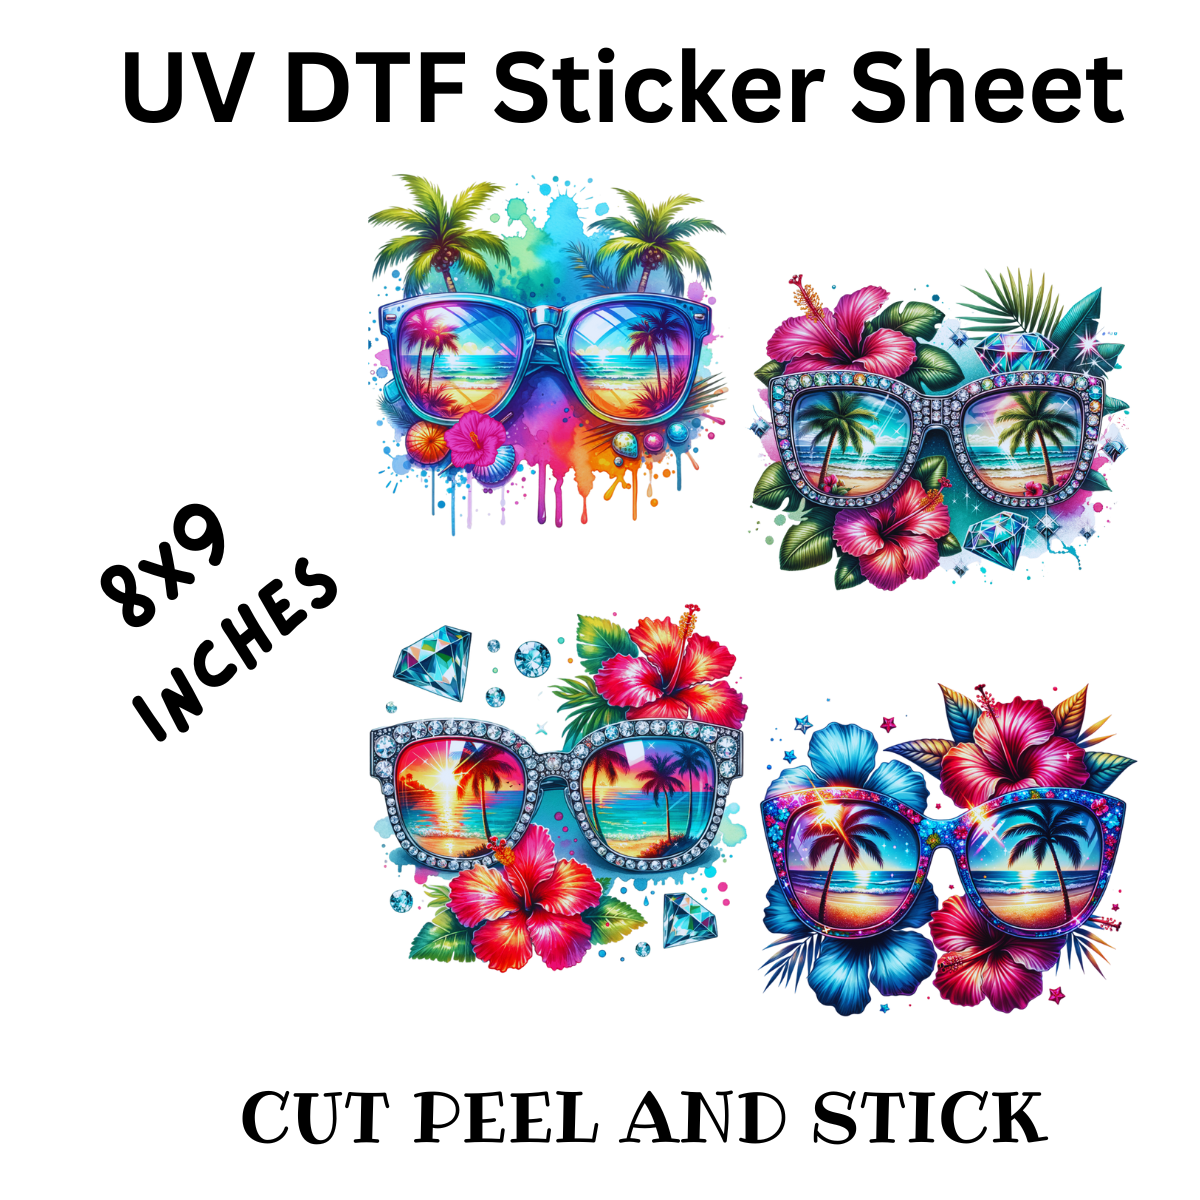 Sunny Shades UV DTF Decal Sticker Sheet 8x9 inches